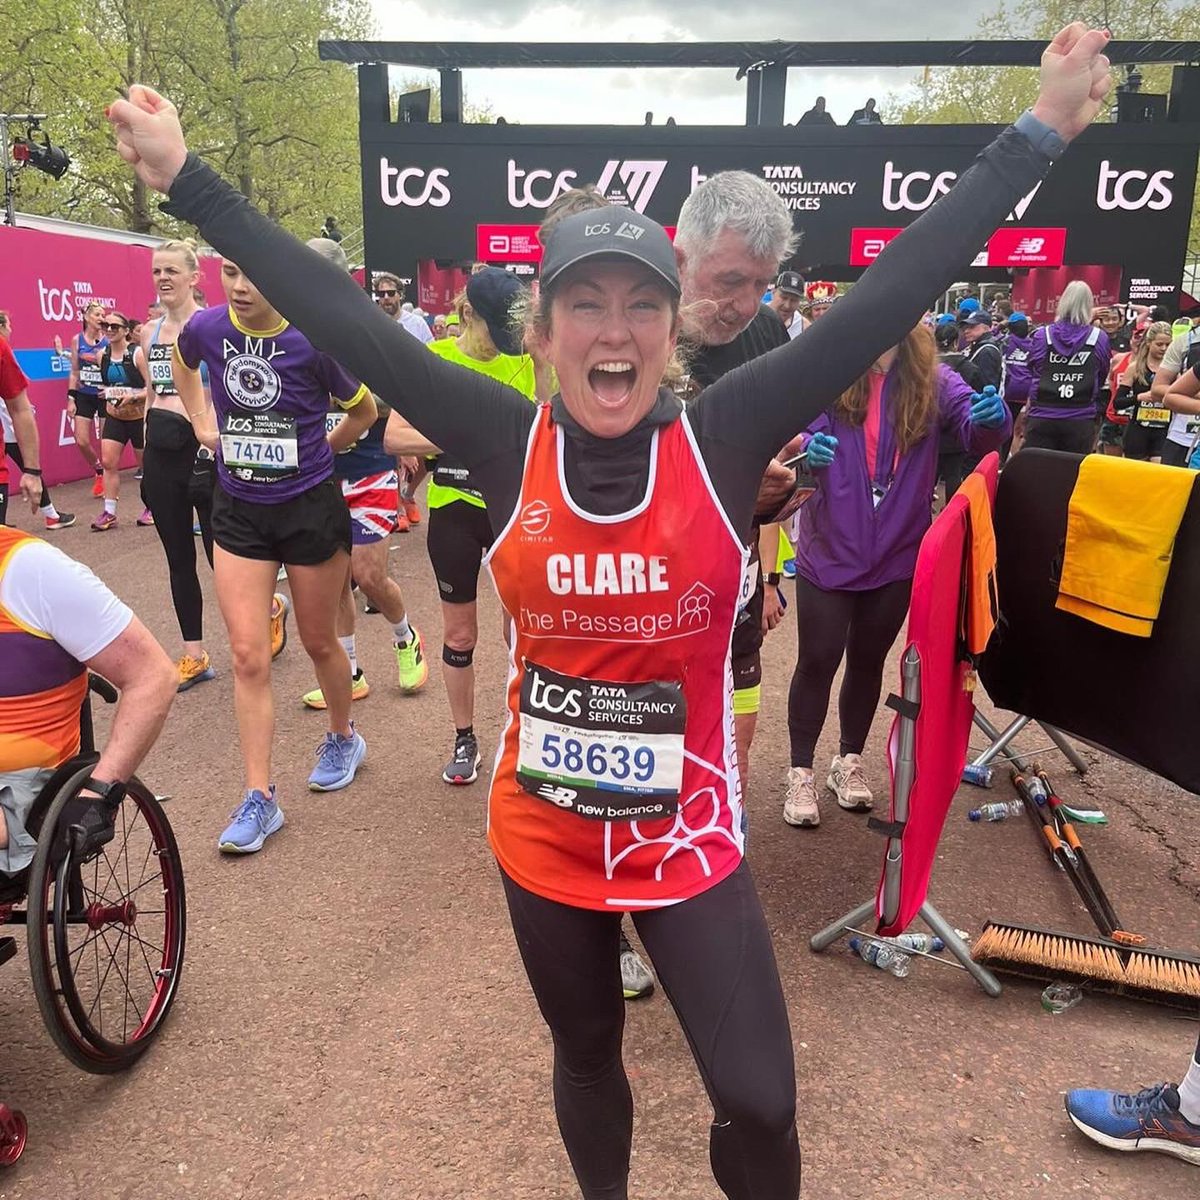 We’re so incredibly proud of our #TeamPassage runners, who took on yesterday’s @LondonMarathon🏅💫 Together, they raised over £13,000, powering through every mile in support of their #community! Want to join us next year?! Sign up below 👇 passage.org.uk/tcs-london-mar…